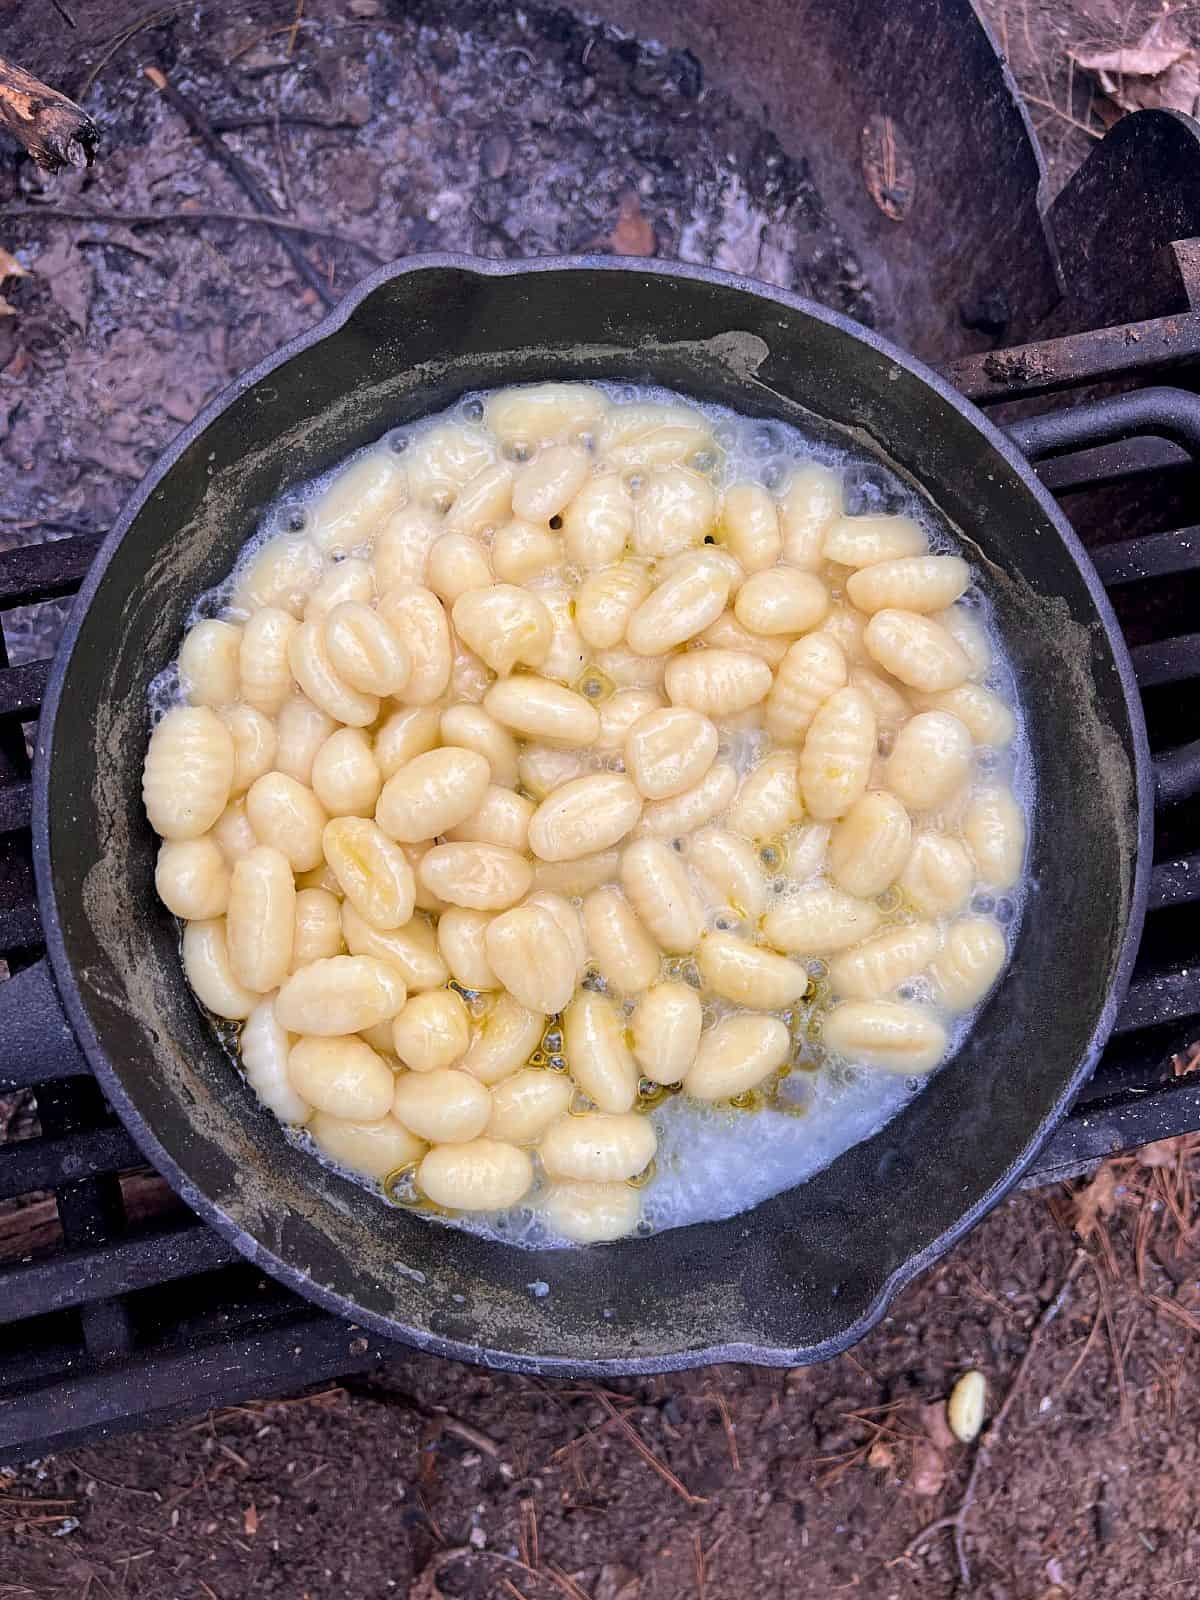 An image of gnocchi cooking in boiling water in a cast iron pan over an open fire.